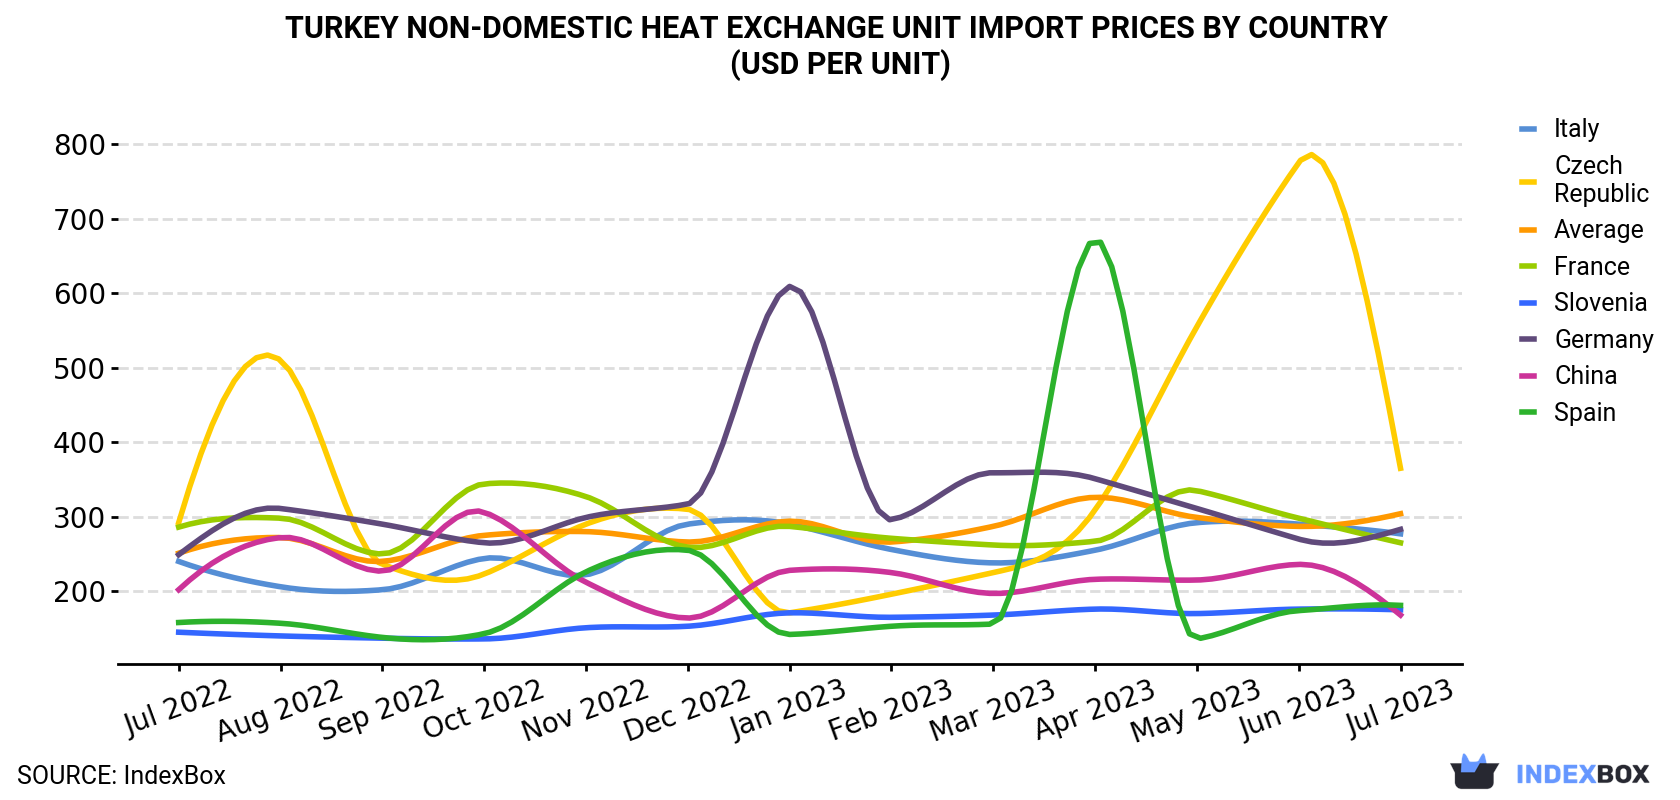 Turkey Non-Domestic Heat Exchange Unit Import Prices By Country (USD Per Unit)